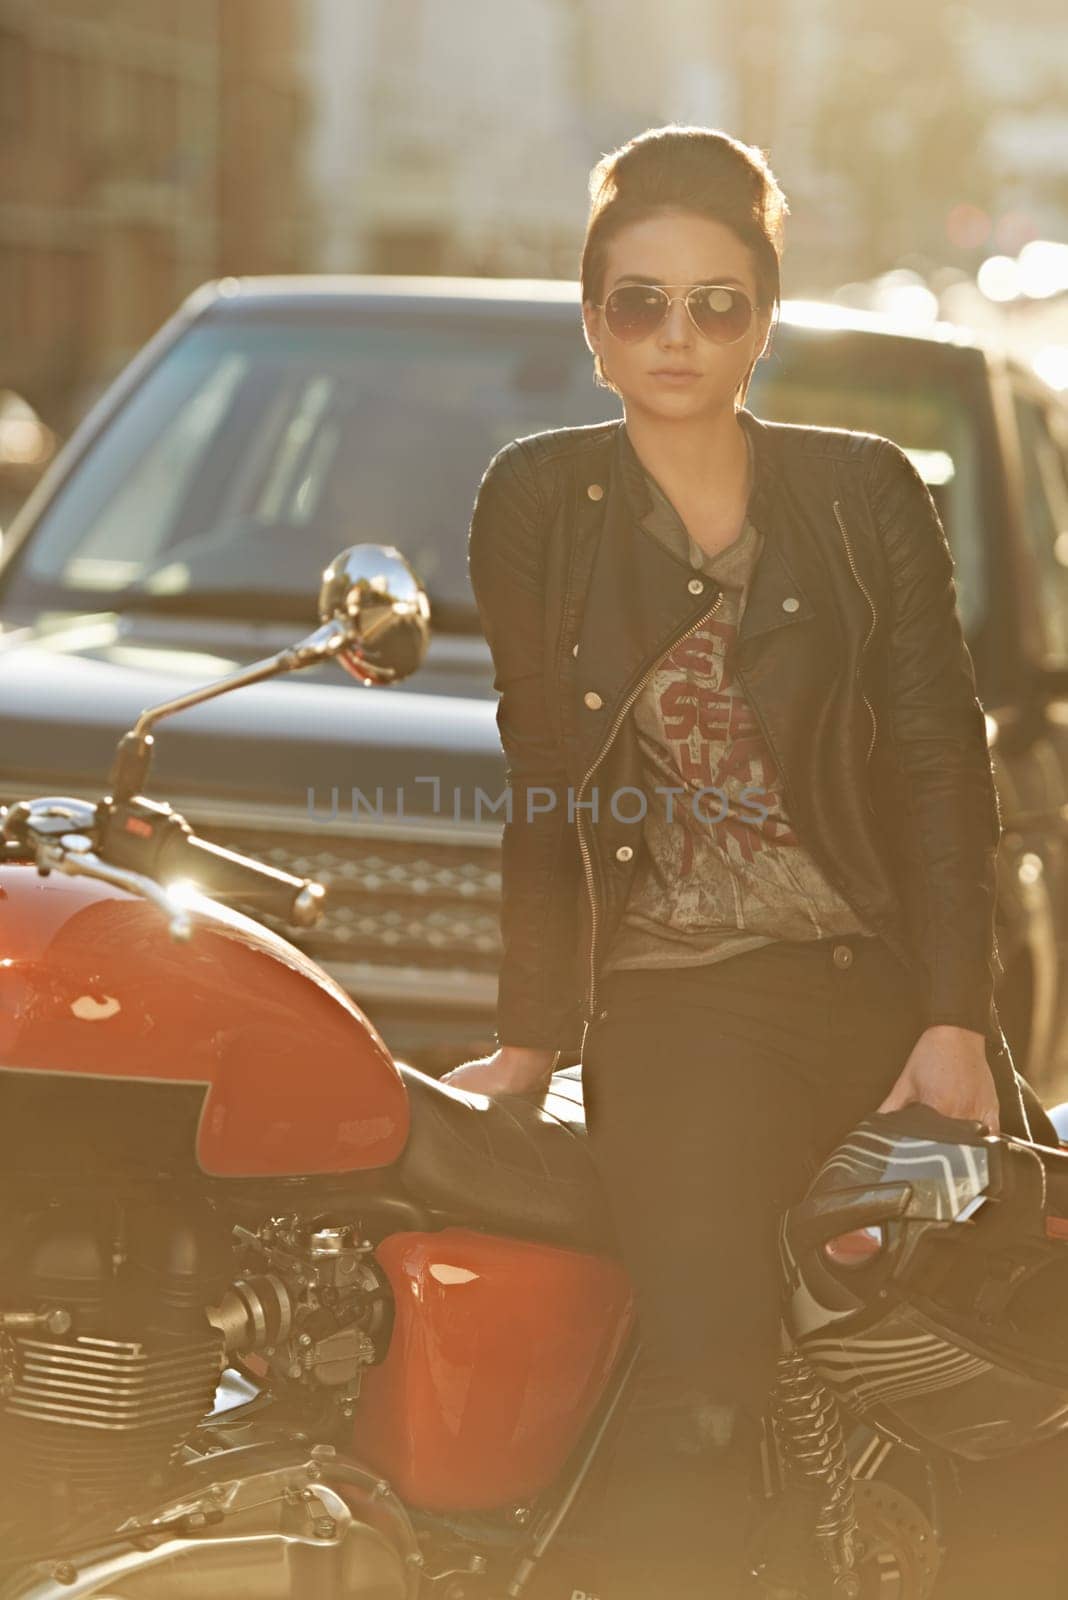 Bike, leather and woman in city with sunglasses for travel, transport or road trip as rebel. Fashion, street and model with attitude on classic or vintage motorcycle for transportation or journey by YuriArcurs